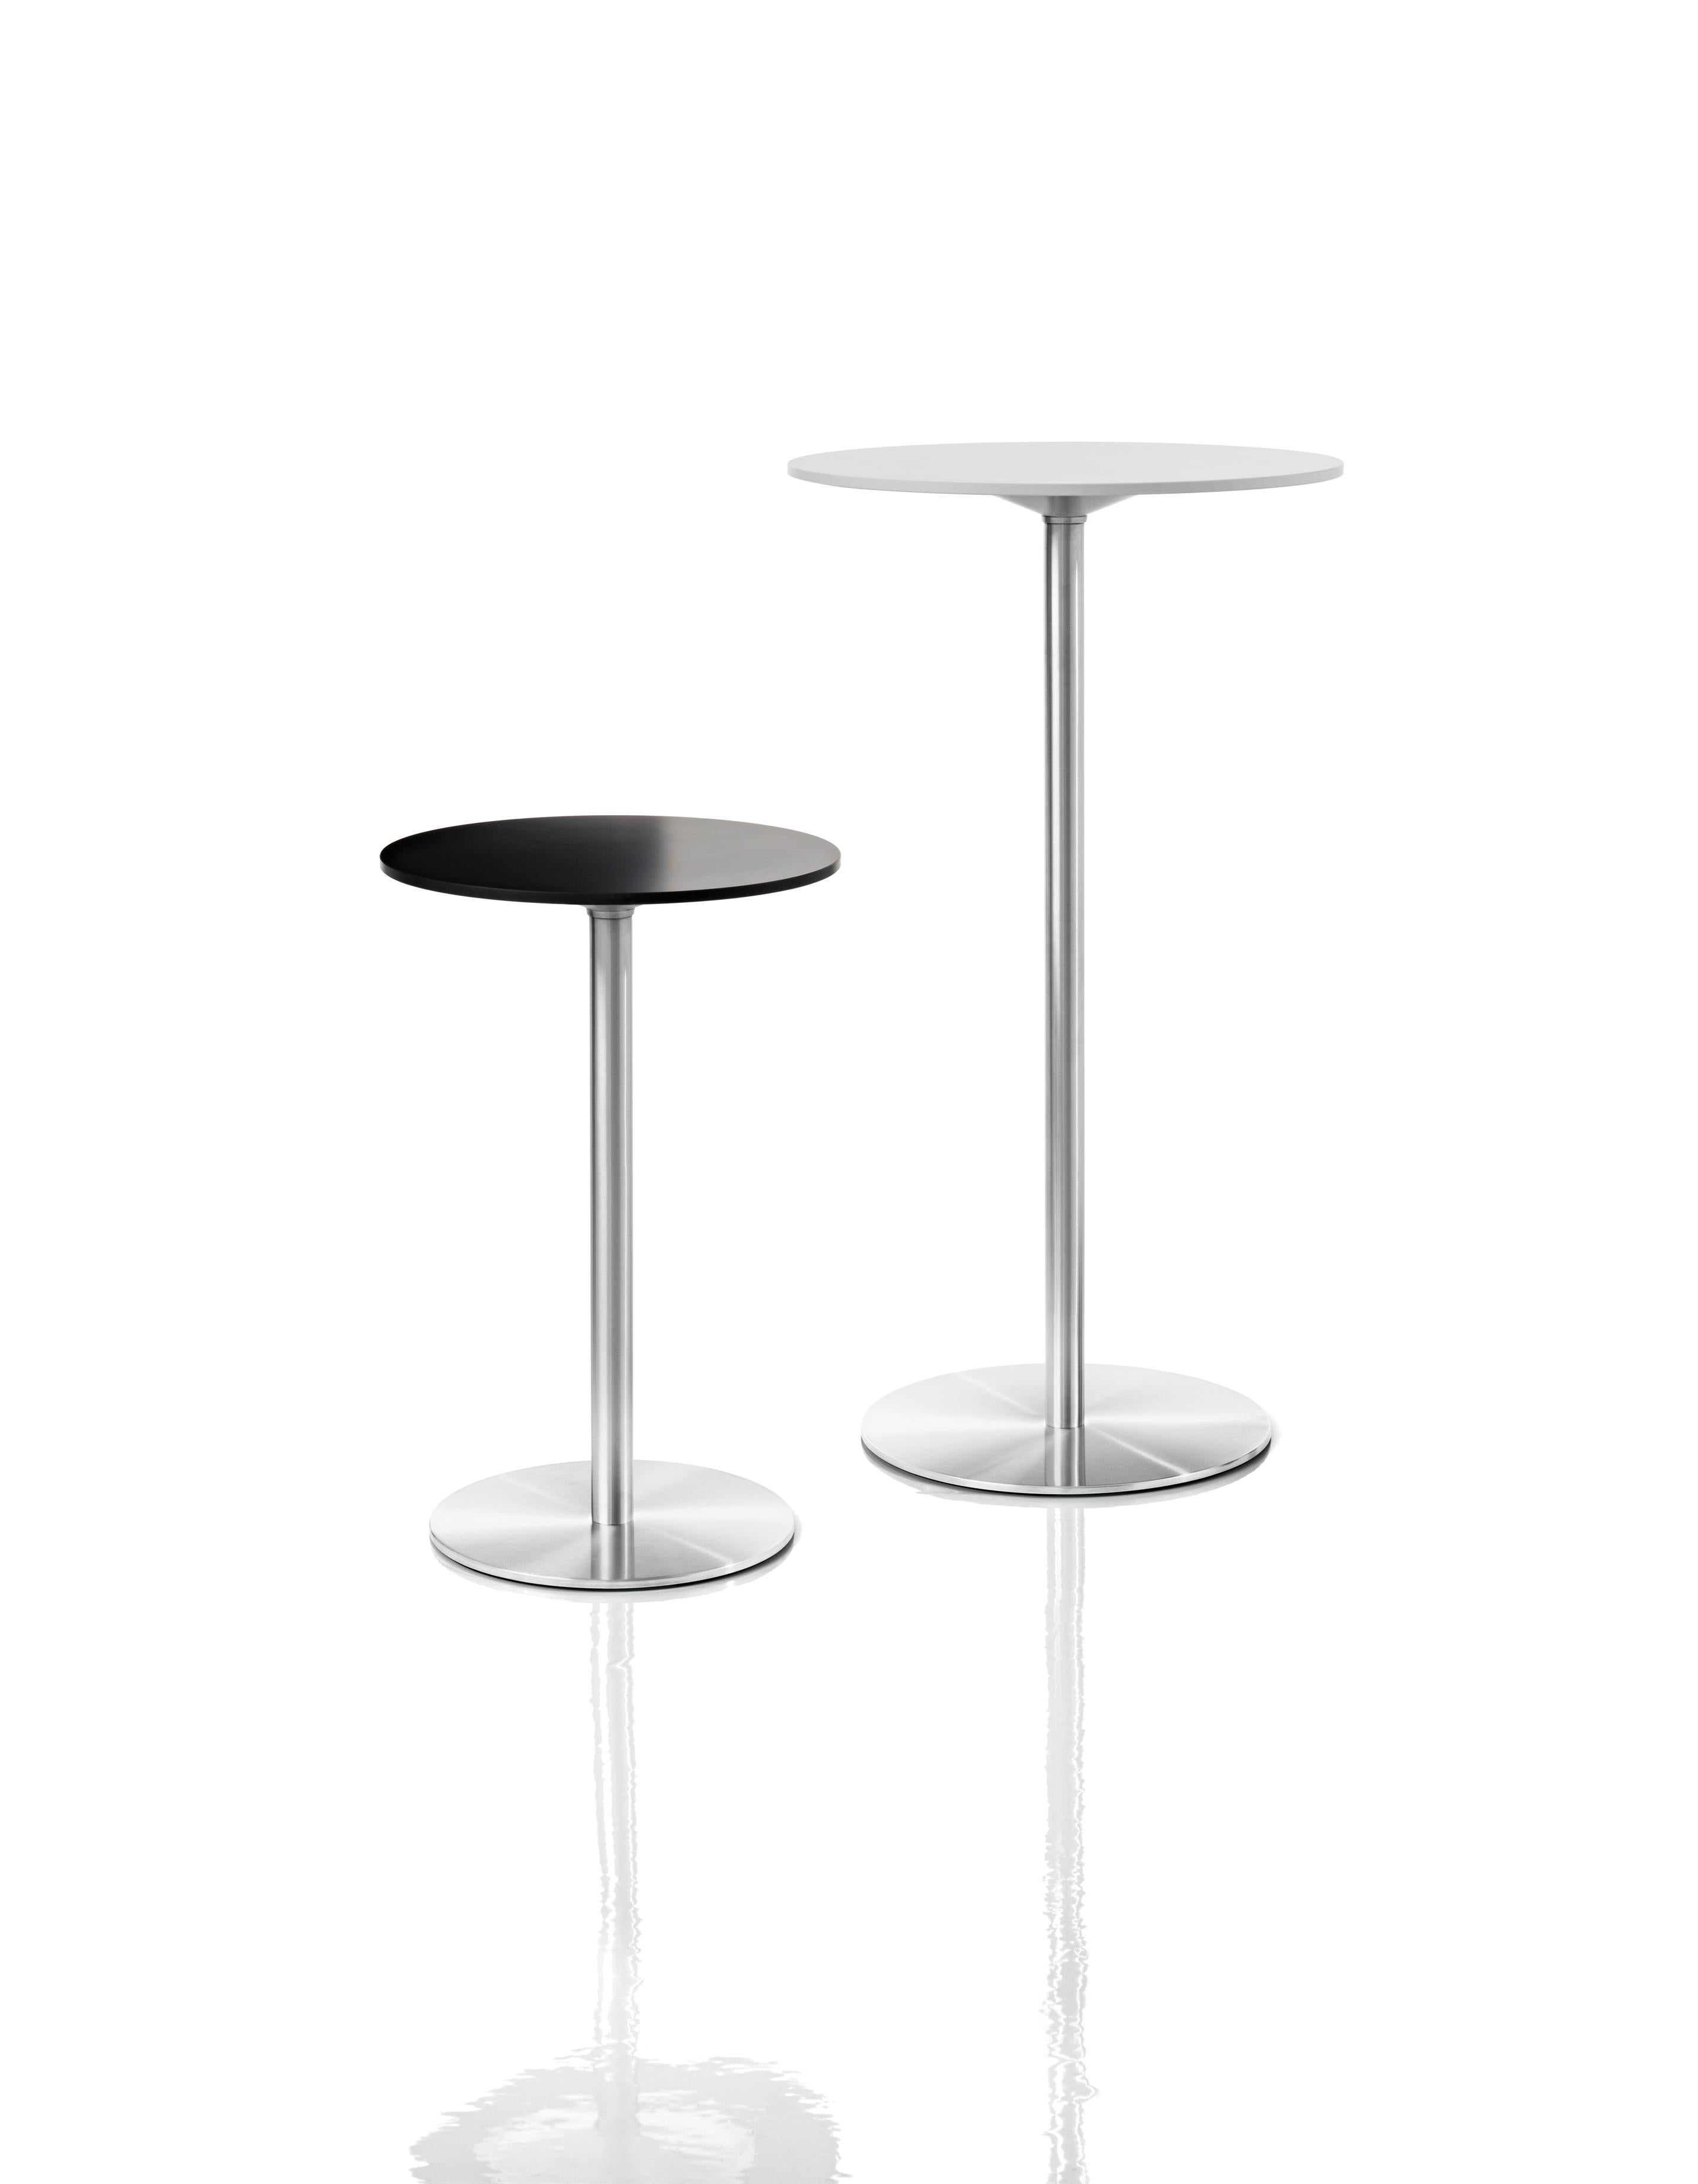 Italian Passe-partout table by MAGIS For Sale